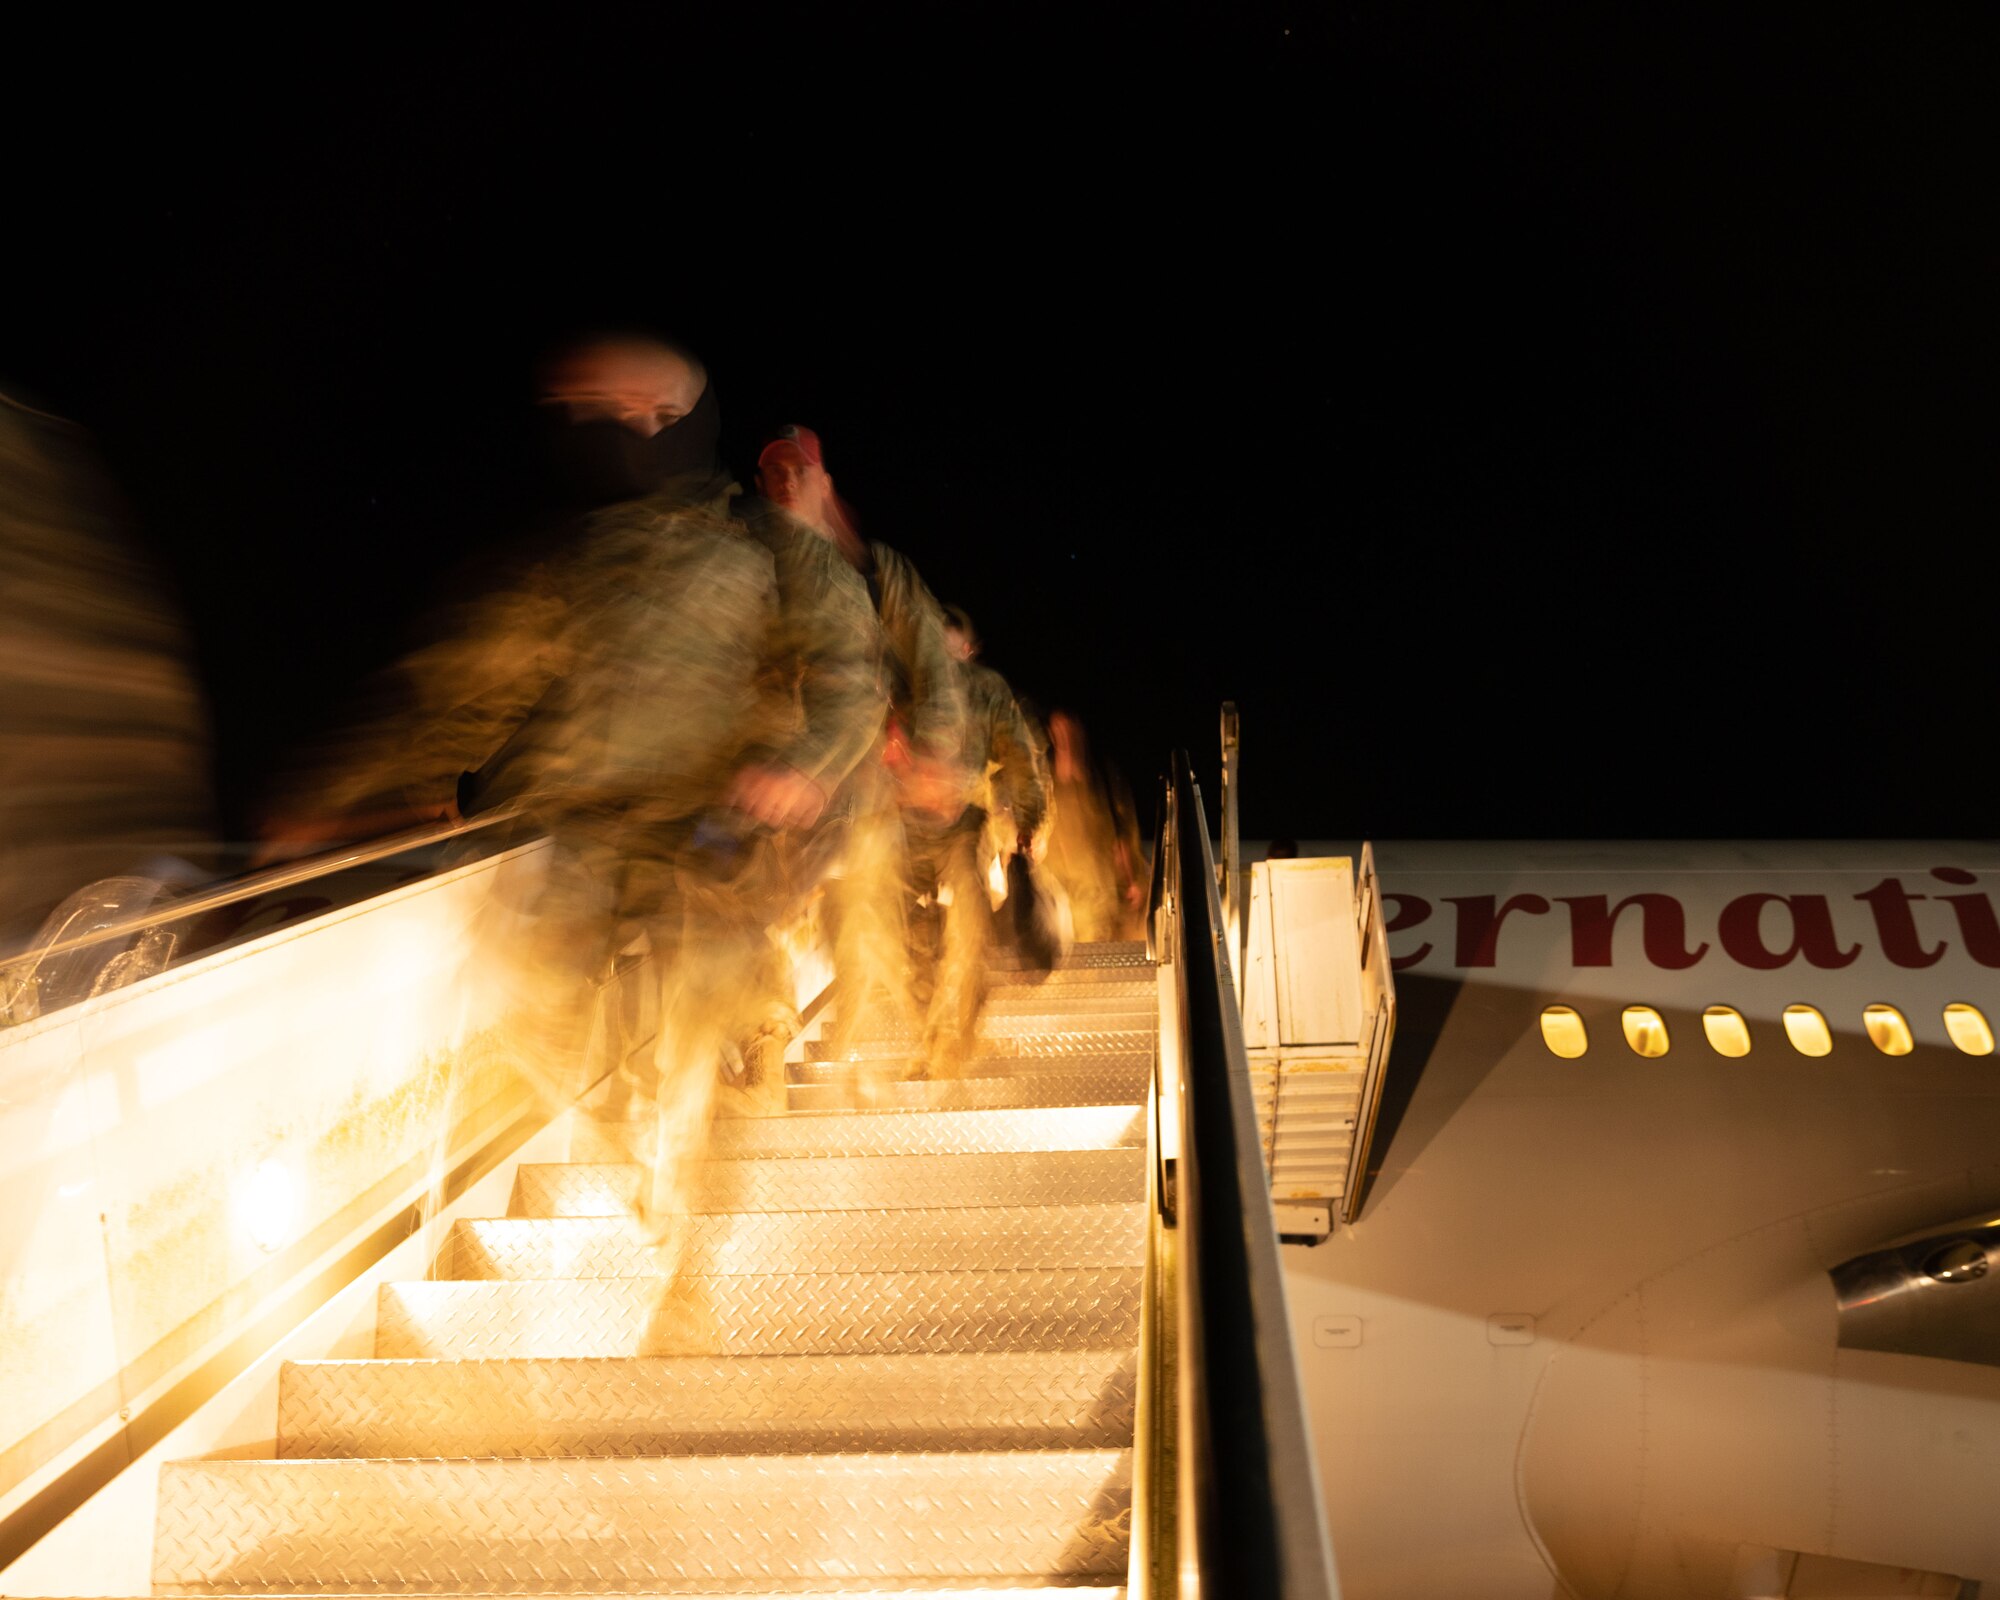 Airman from the 48th Fighter Wing disembark an aircraft after returning from deployment at Royal Air Force Lakenheath, England, Nov. 2, 2021. The 494th Fighter Squadron was deployed to an undisclosed location in Southwest Asia for eight months in support of Operation Inherent Resolve. (U.S. Air Force photo by Airman 1st Class Cedrique Oldaker)